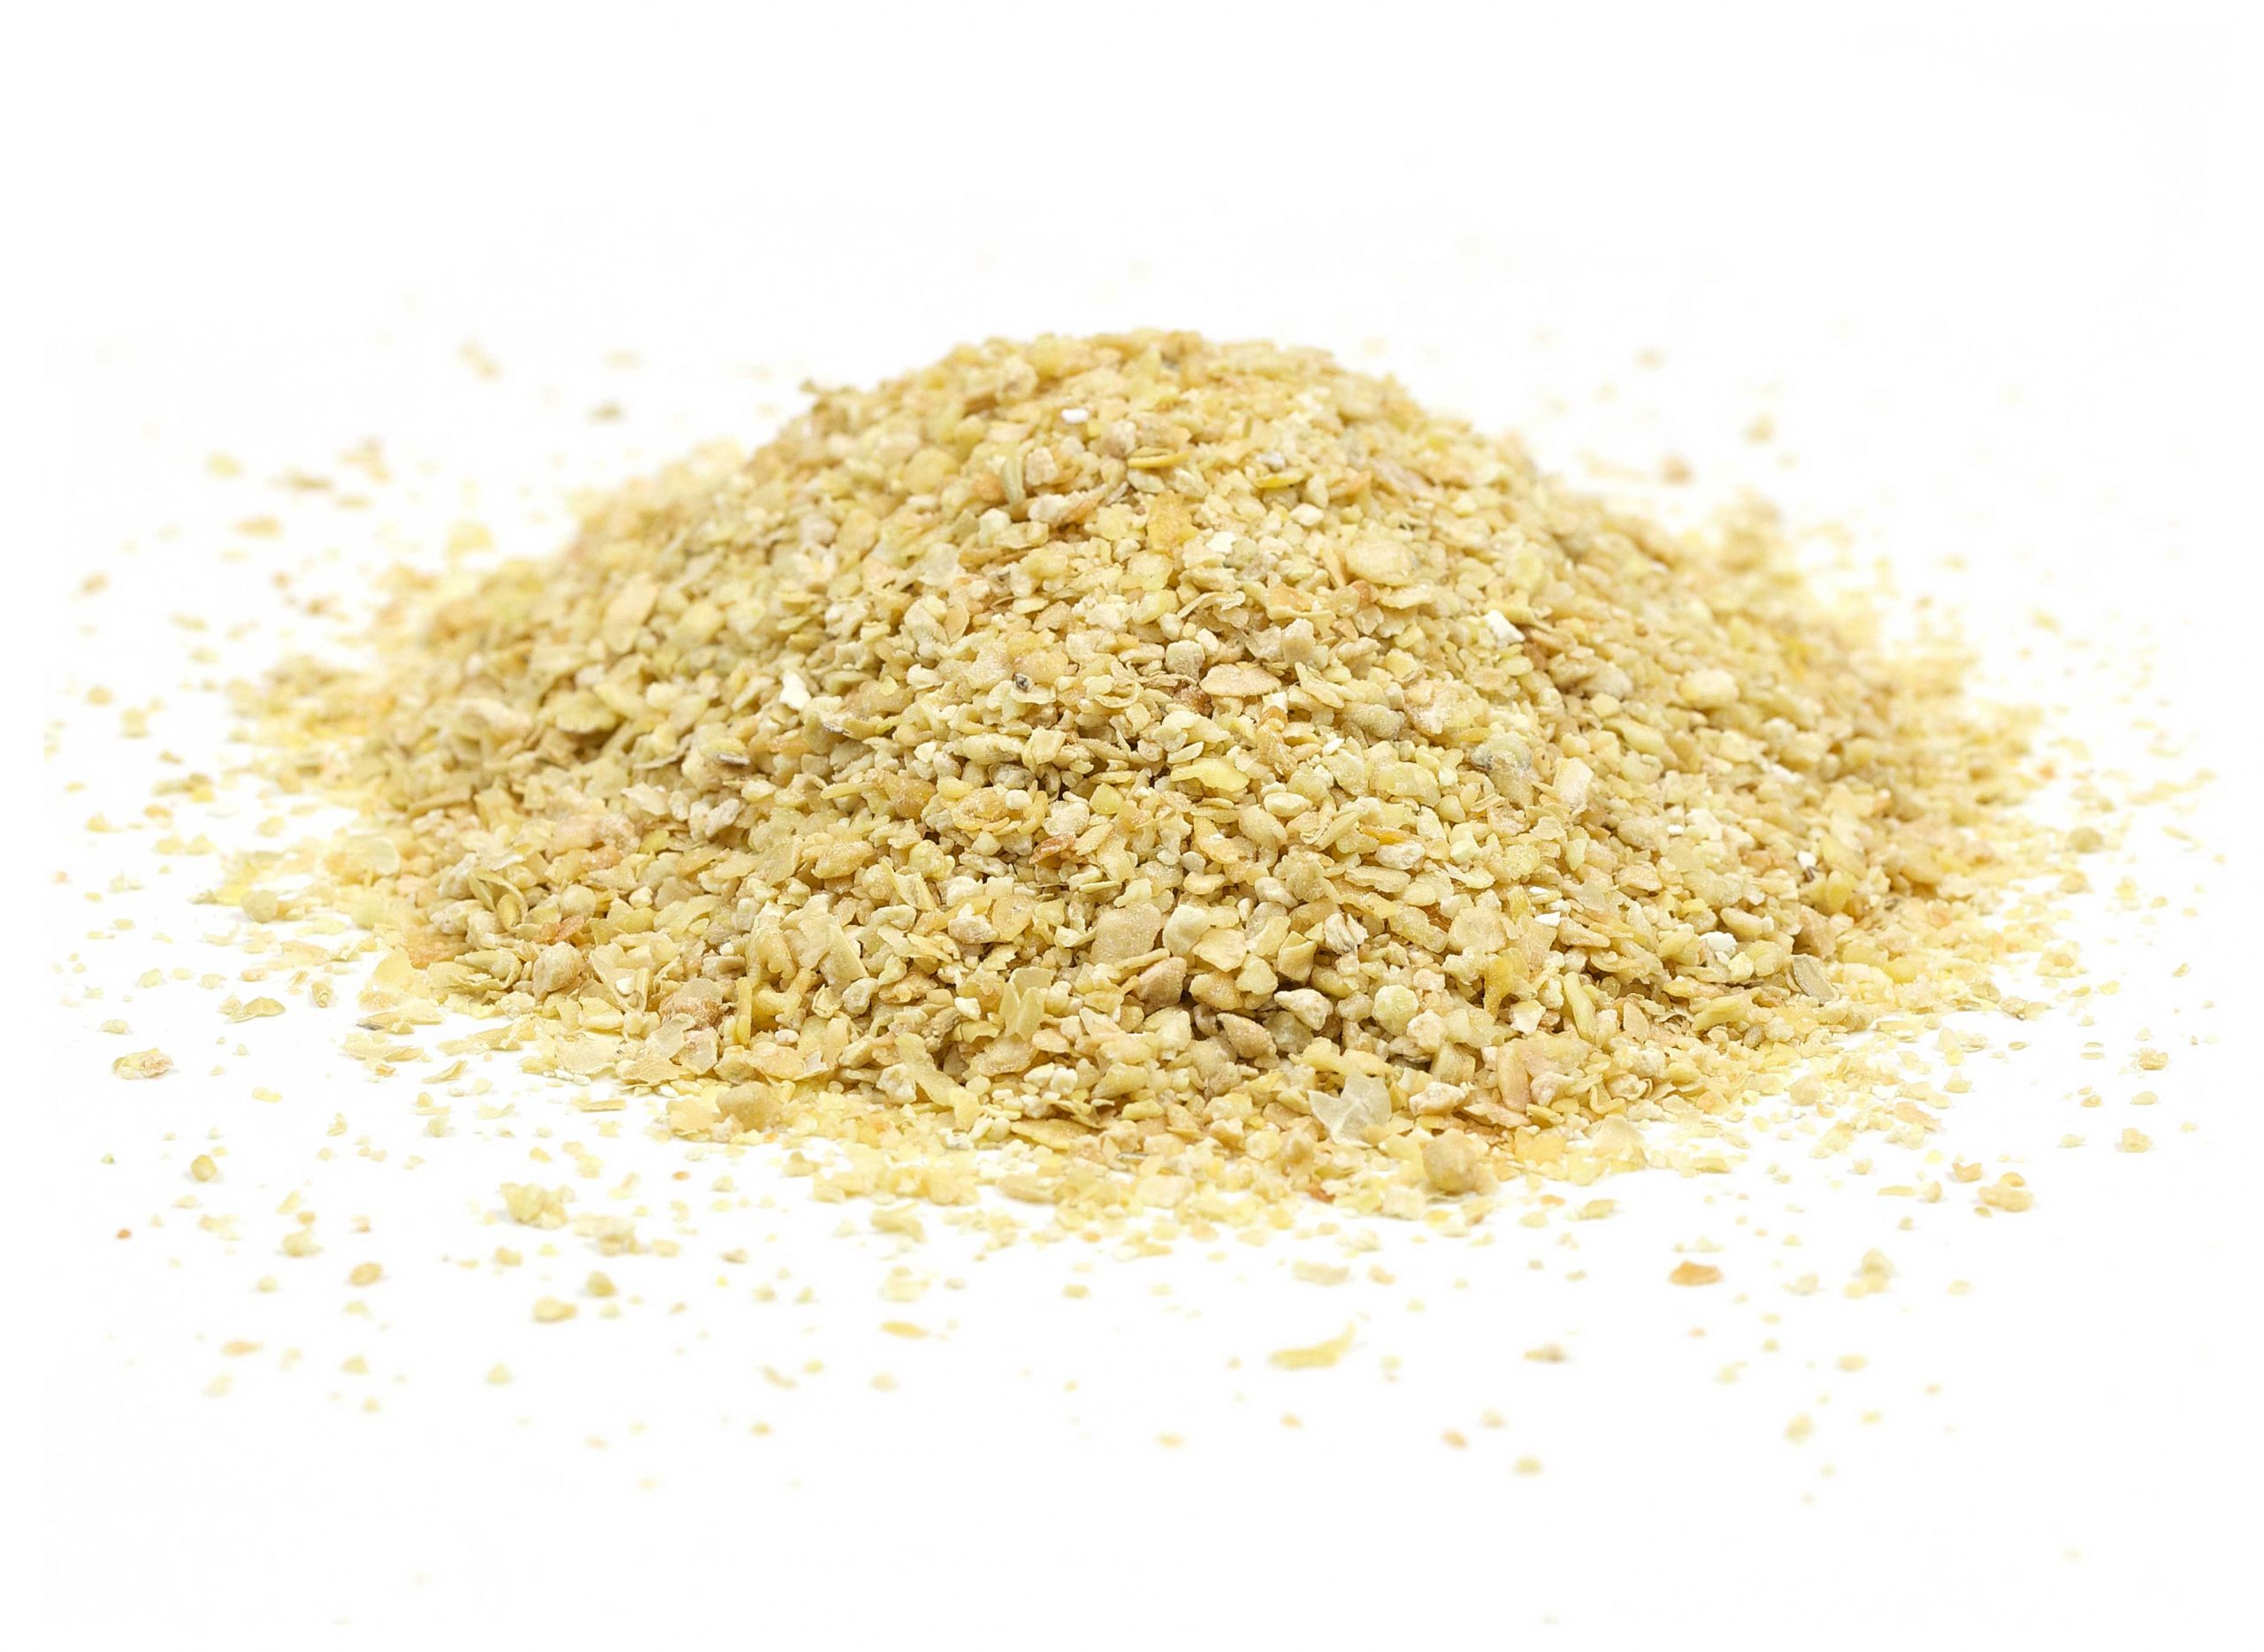 Close up of a small pile of soybean meal on a white background.